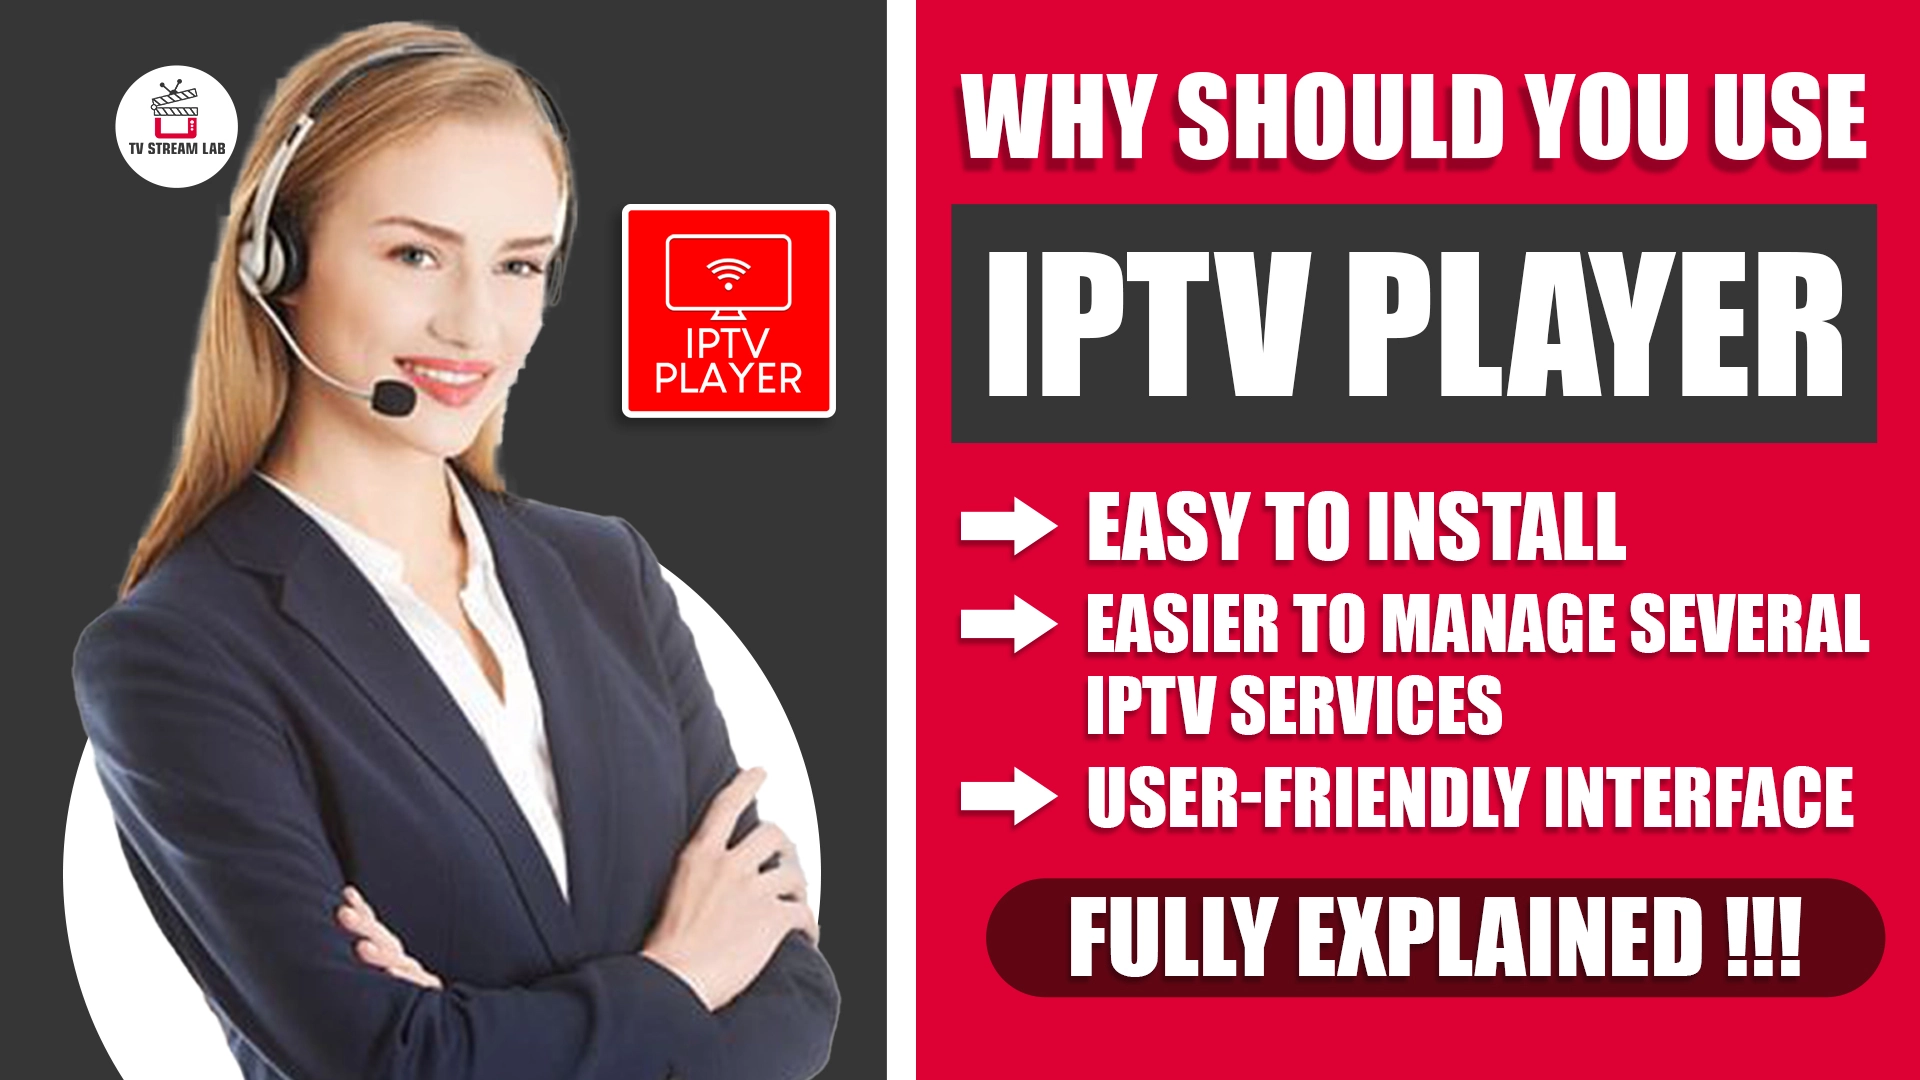 Why Should You Use IPTV Player